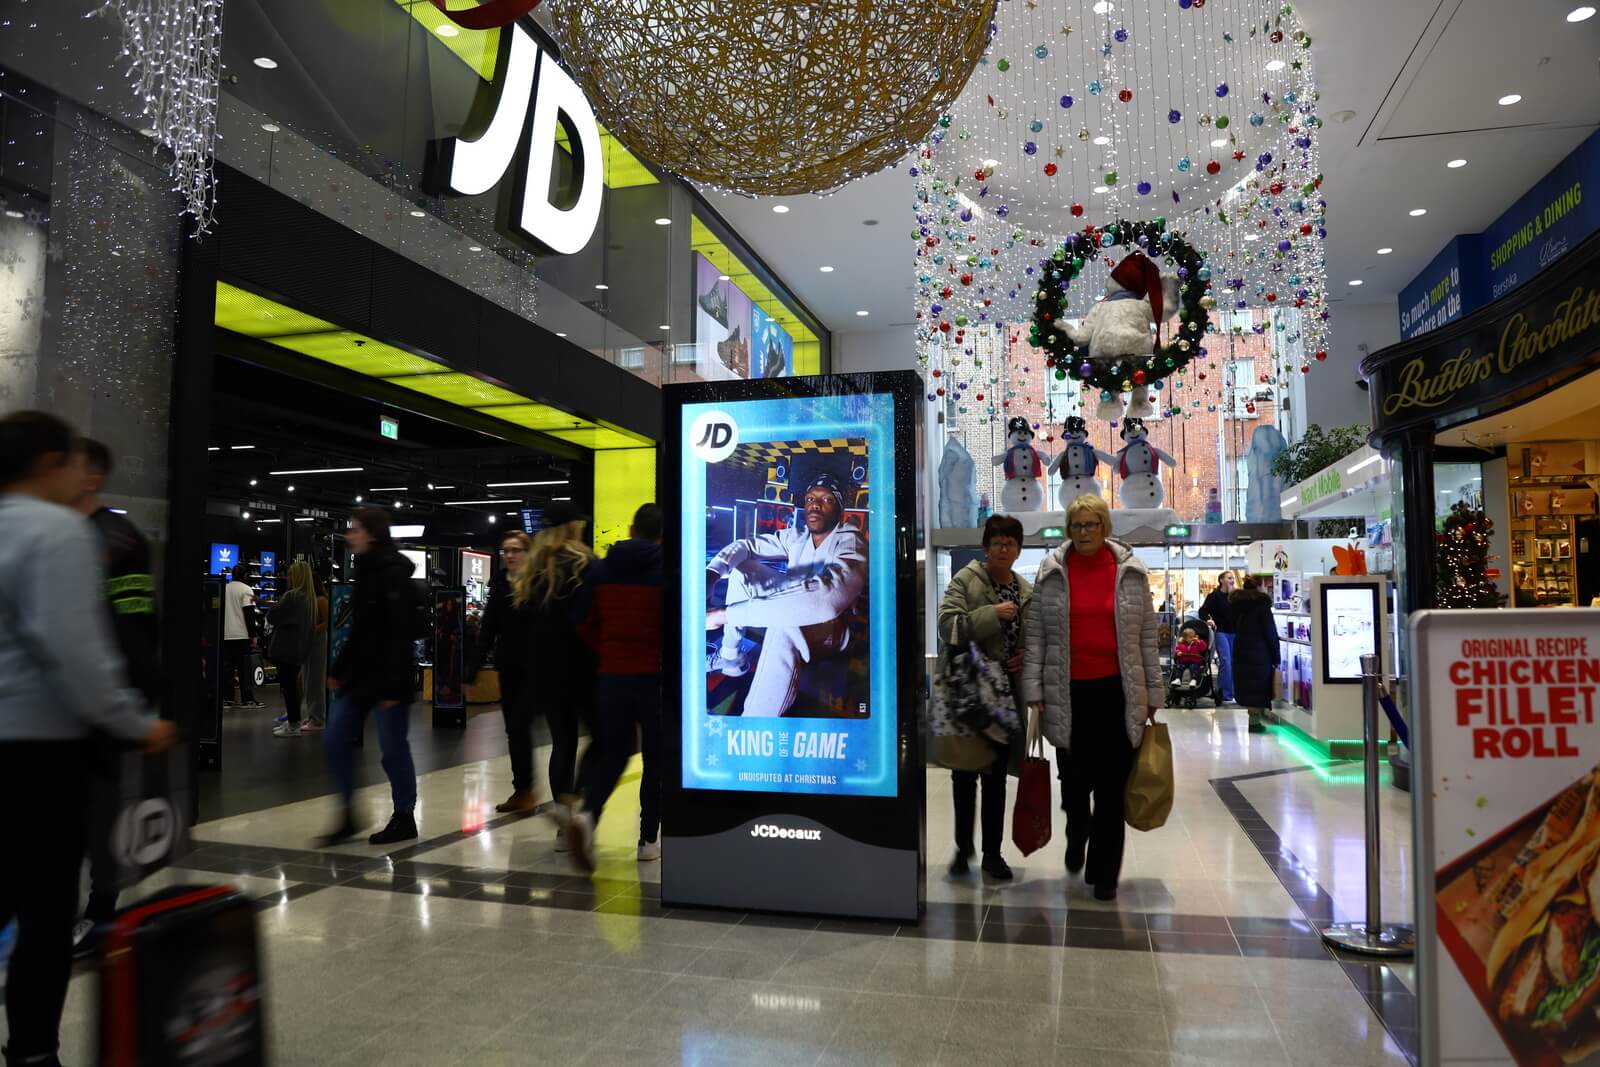 Digital advertising screen outside a JD Sports store in a mall, showcasing festive JD Sports products